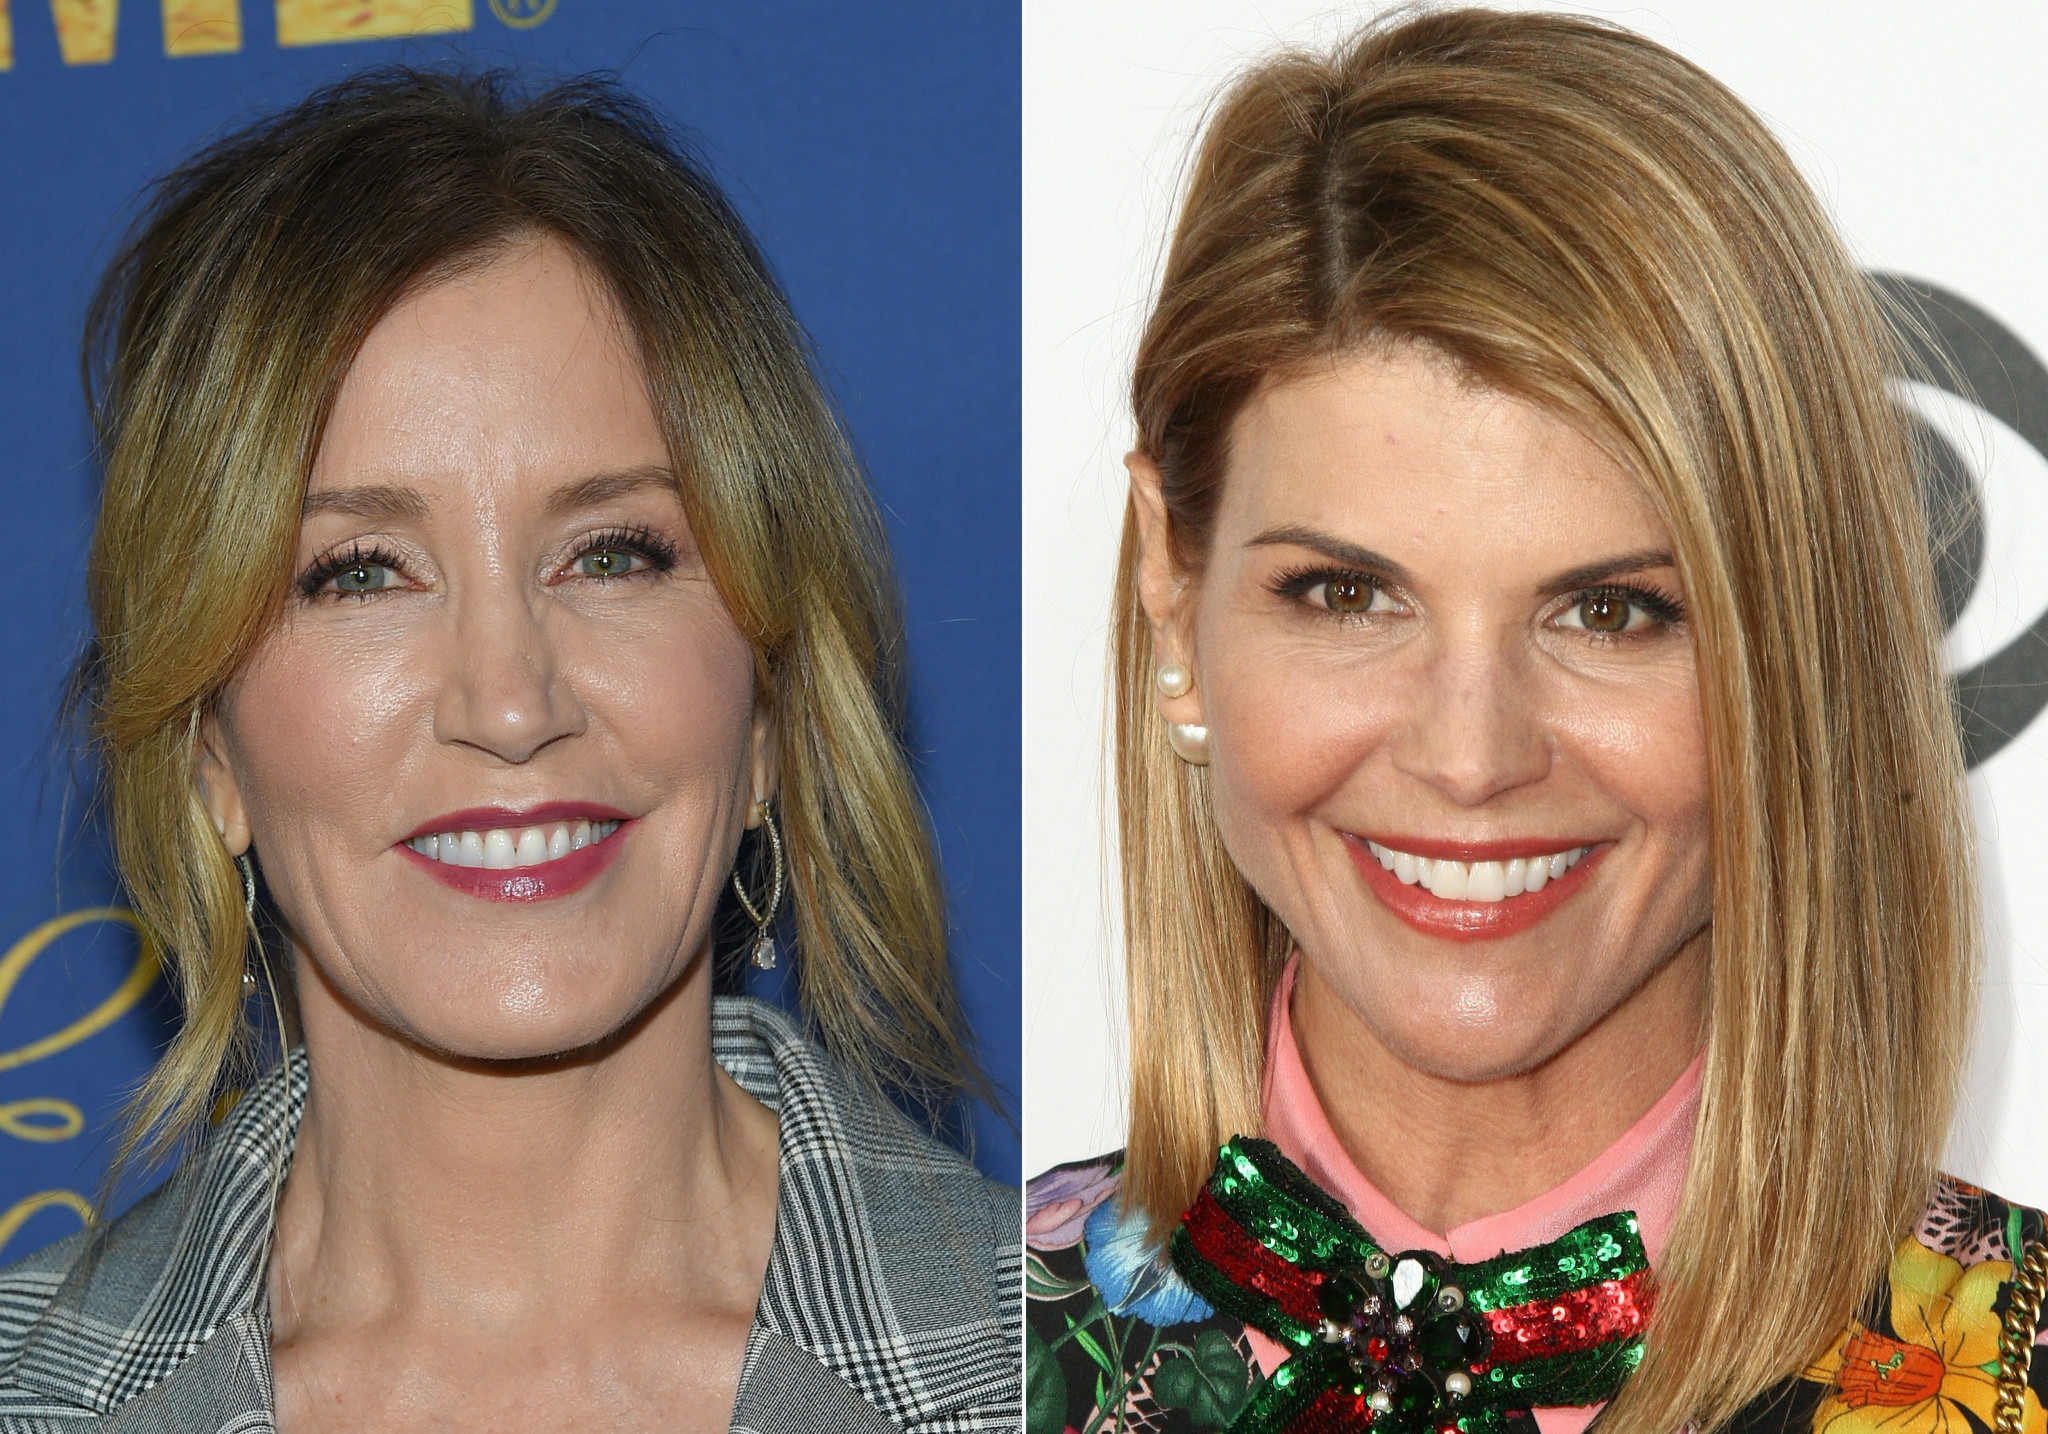 Felicity Huffman and Lori Loughlin were involved in the admissions scandal ©Getty Images